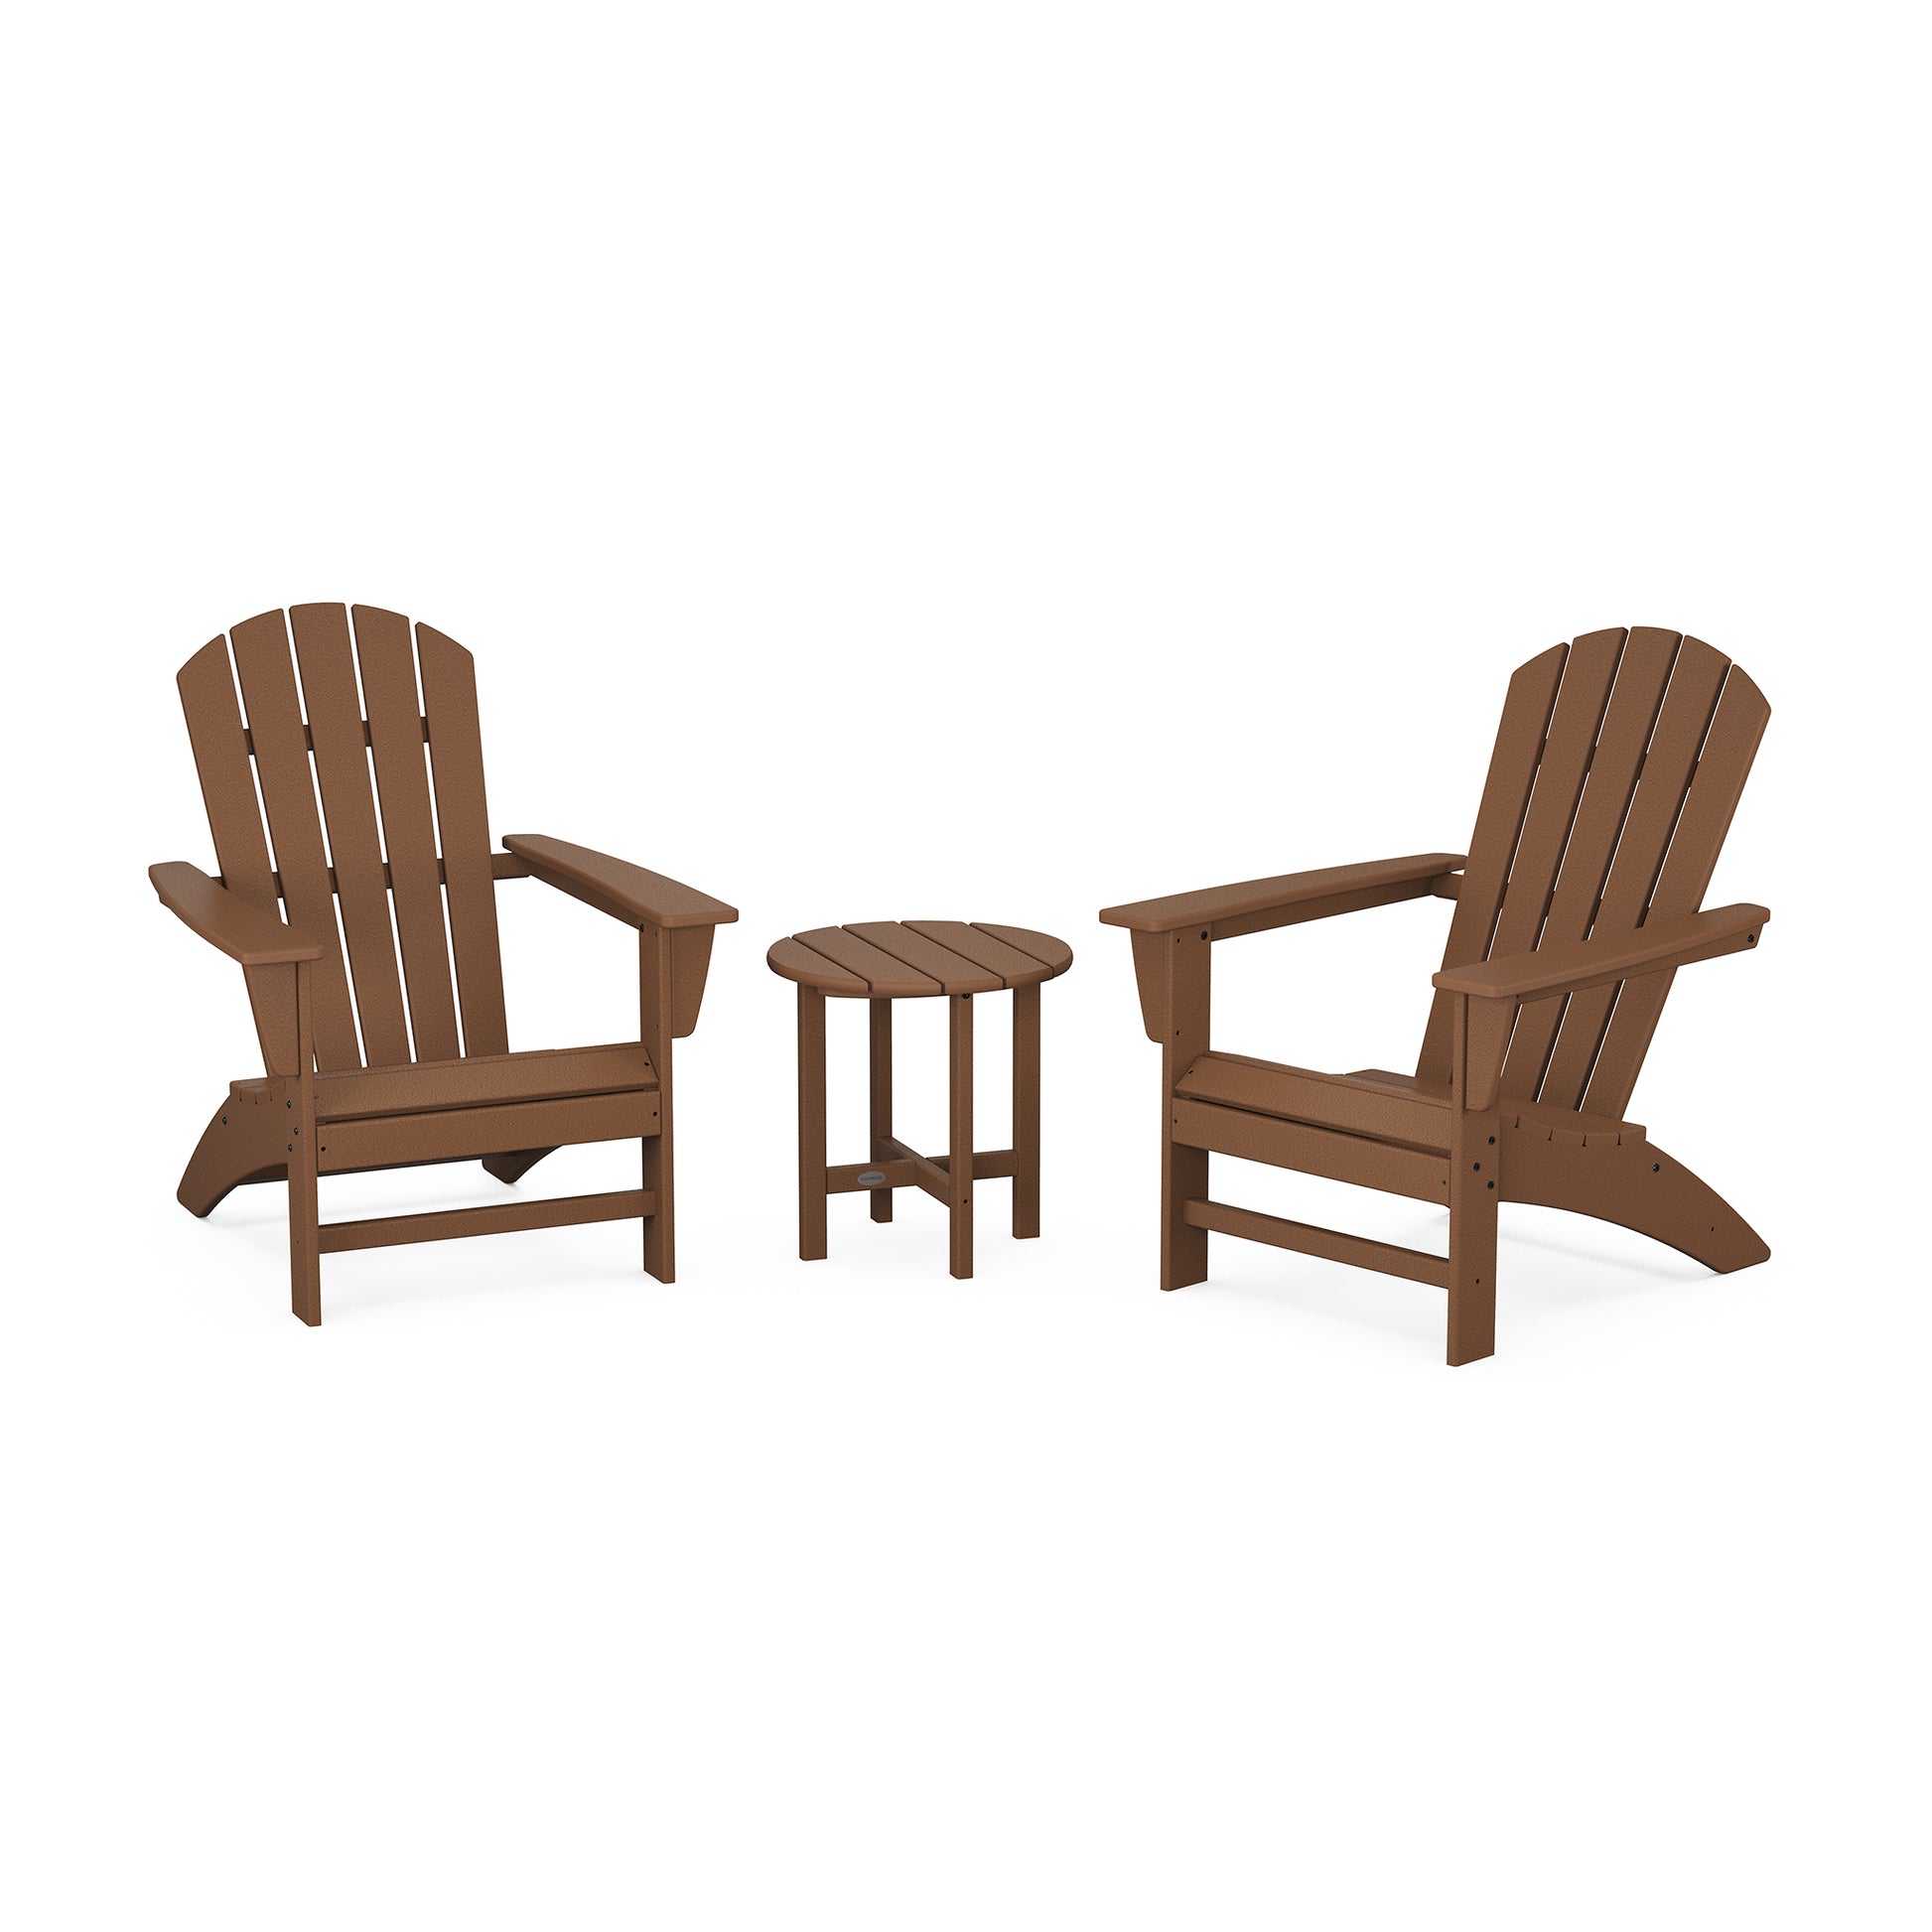 Two brown POLYWOOD Nautical 3-Piece Adirondack Sets with a matching small round table between them, displayed on a plain white background.